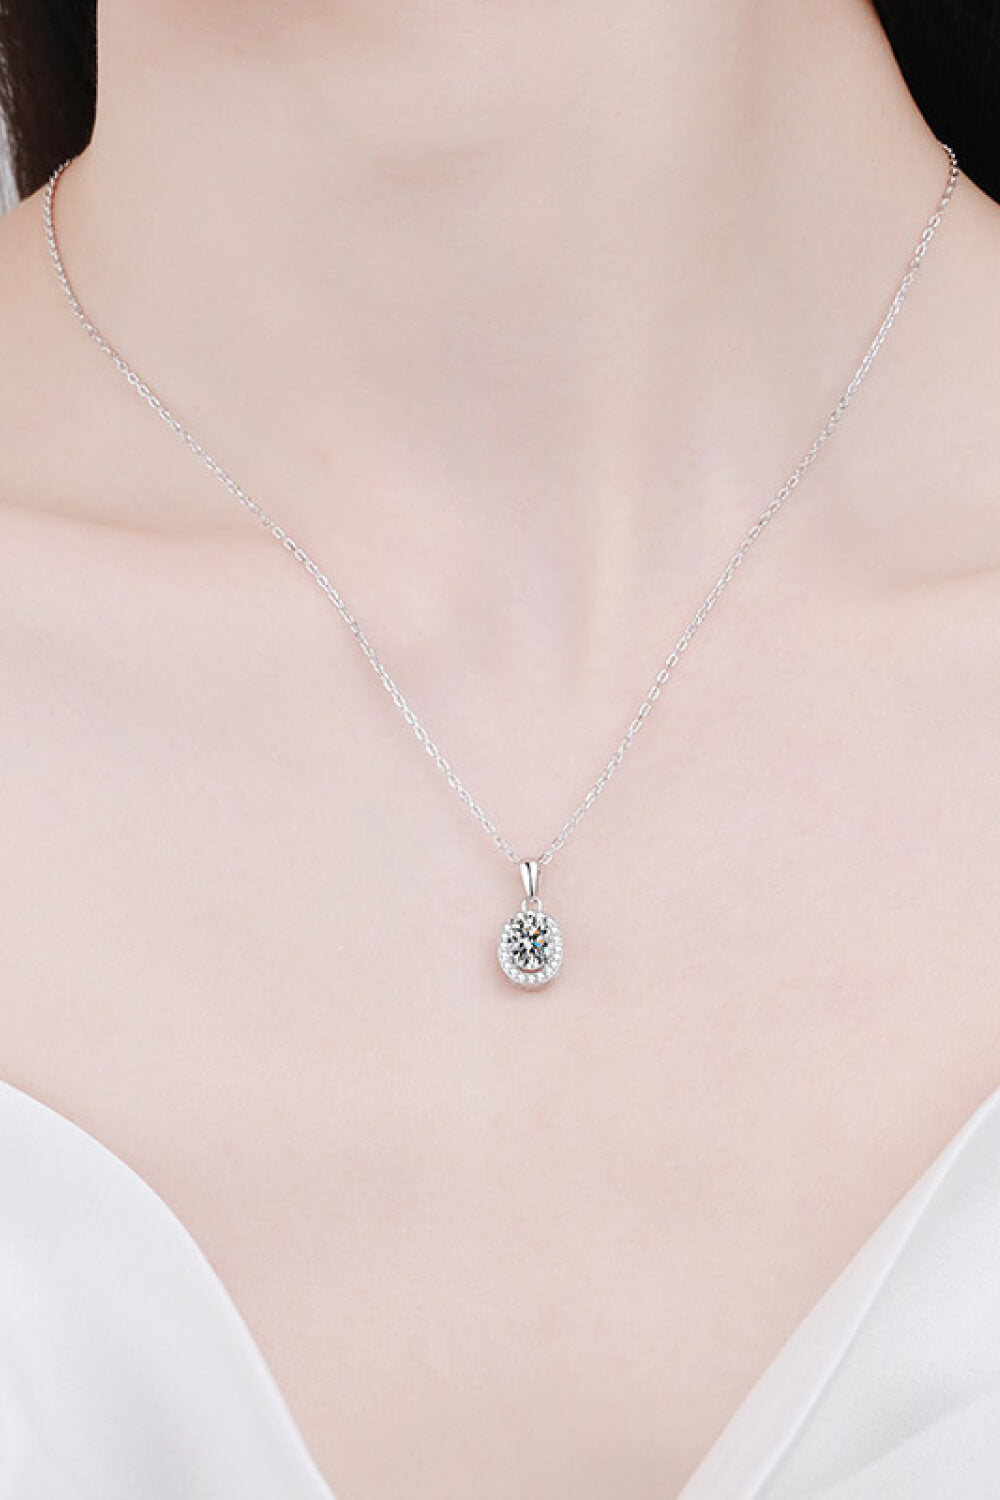 Be The One 1 Carat Moissanite Pendant Necklace - Dash Trend